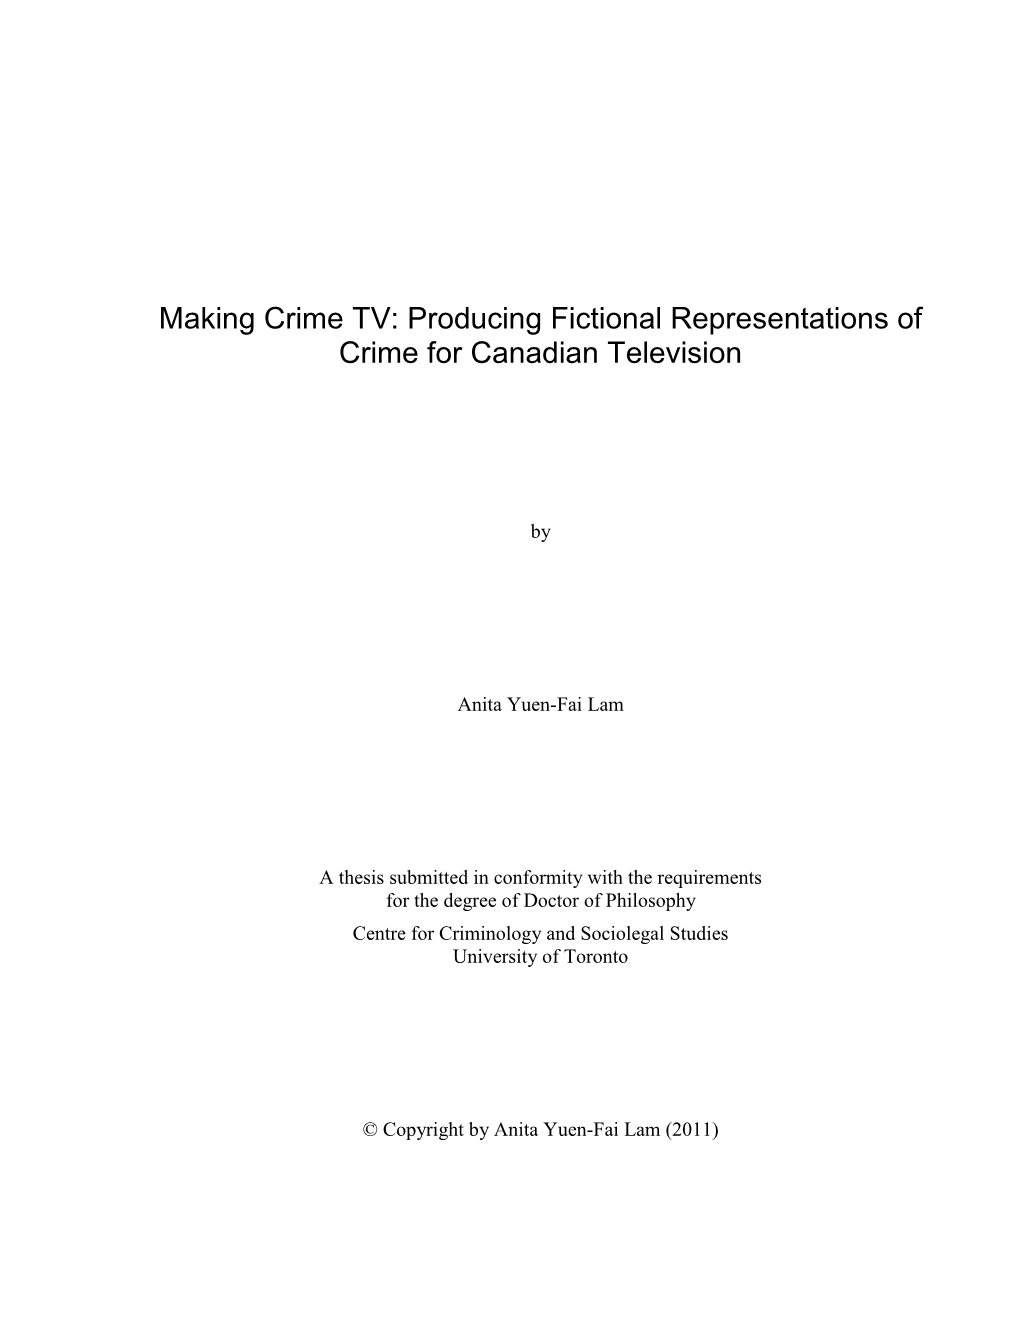 Making Crime TV: Producing Fictional Representations of Crime for Canadian Television